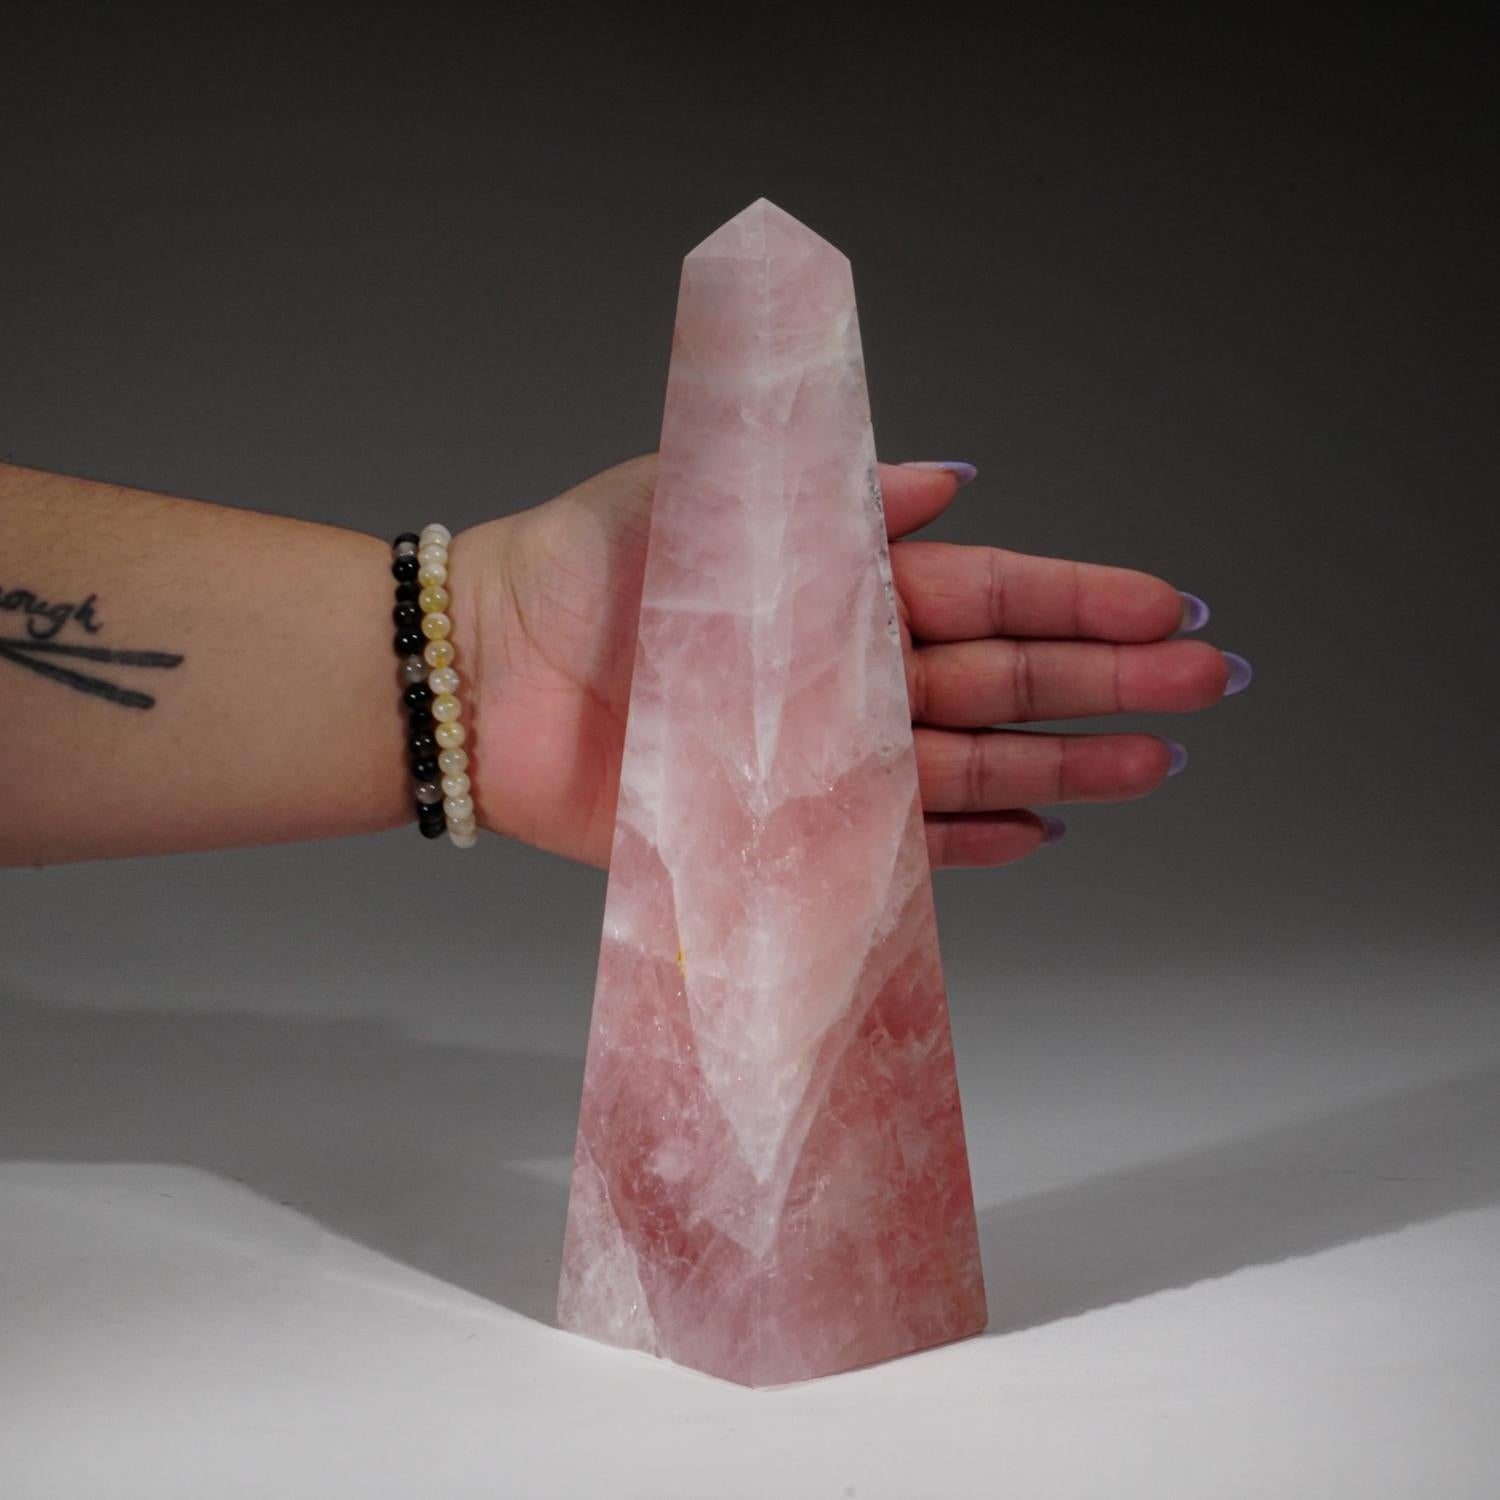 AAA-quality gem transparent polished Brazilian Rose Quartz obelisk from Brazil. This natural specimen has a super-pink color and a highly-polished mirror face. 

Rose Quartz is the stone of unconditional love. One of the most important stones for